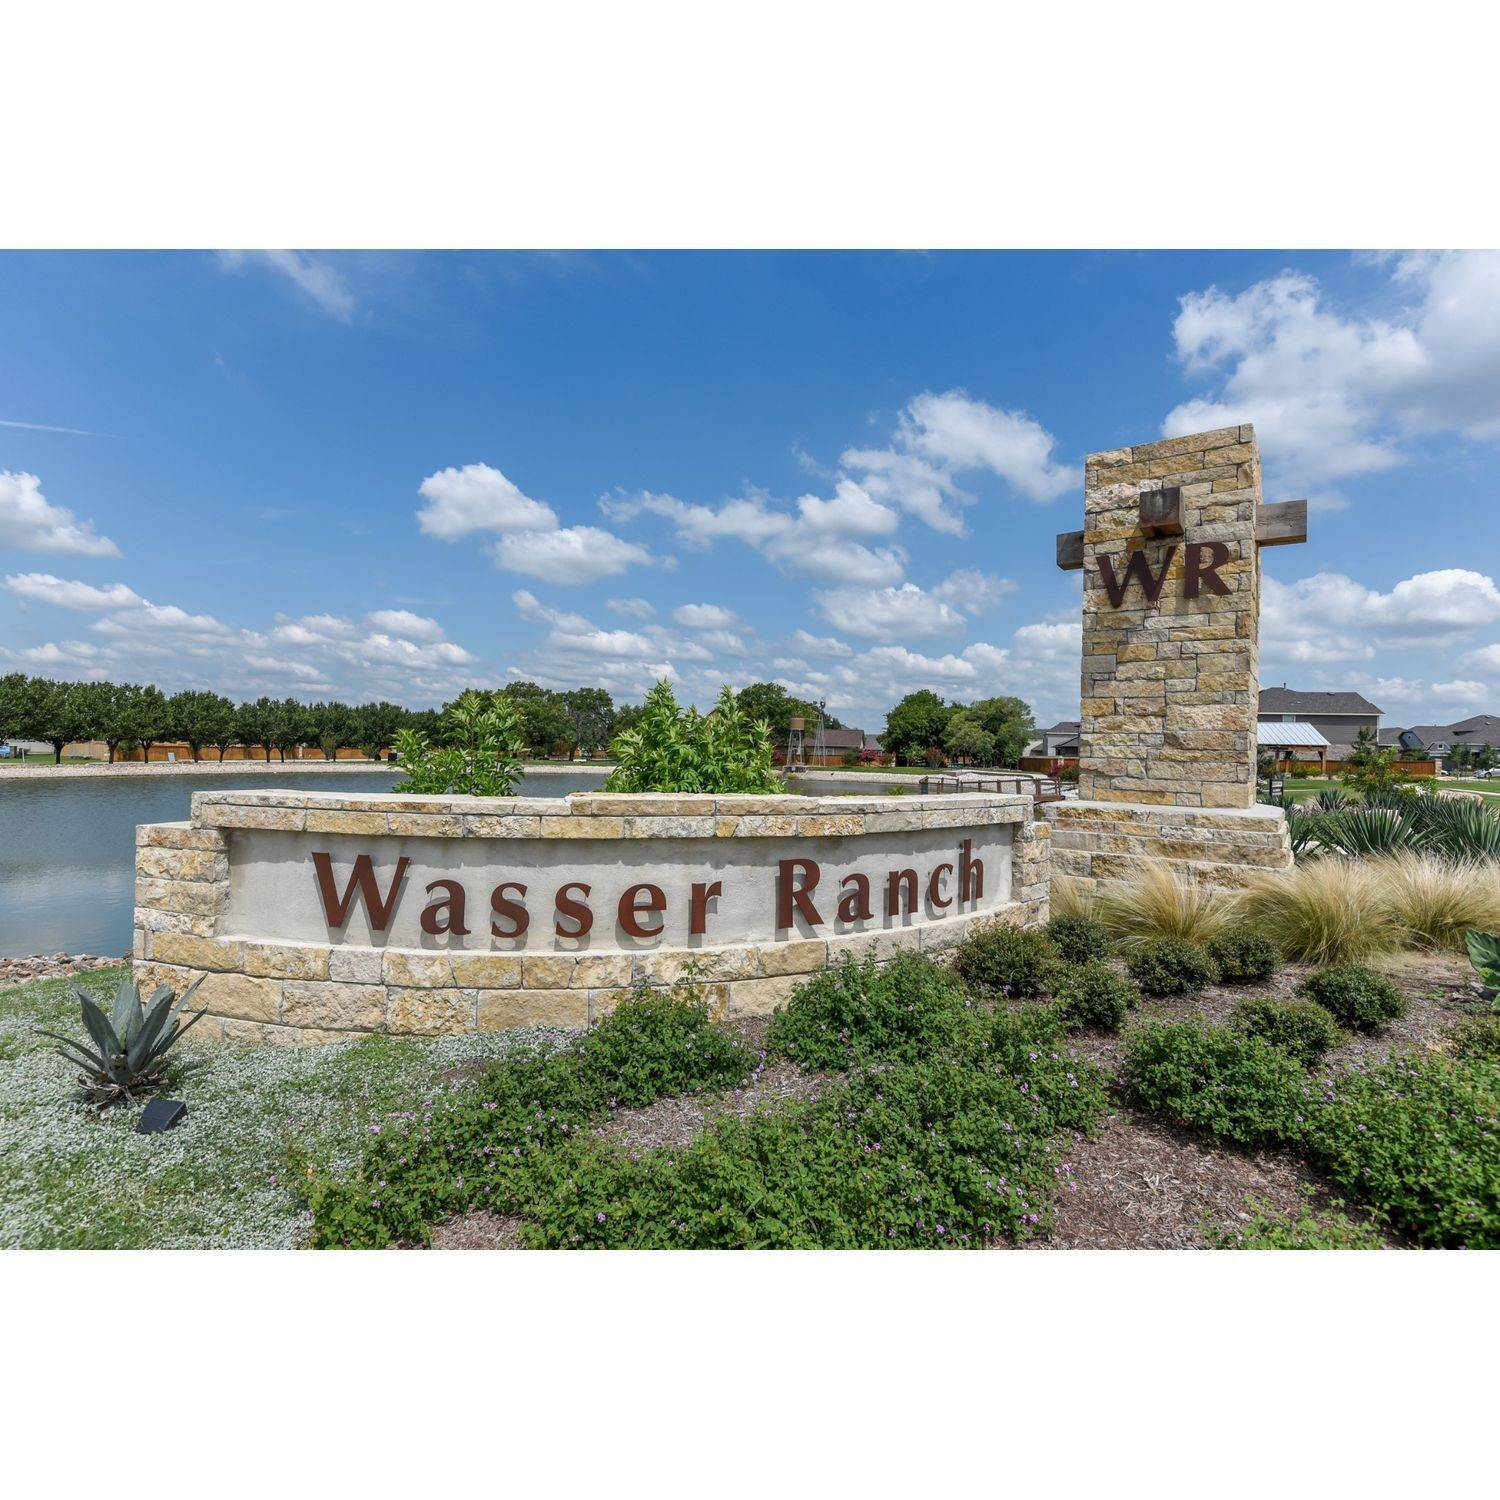 15. Wasser Ranch building at 917 Rench, New Braunfels, TX 78130